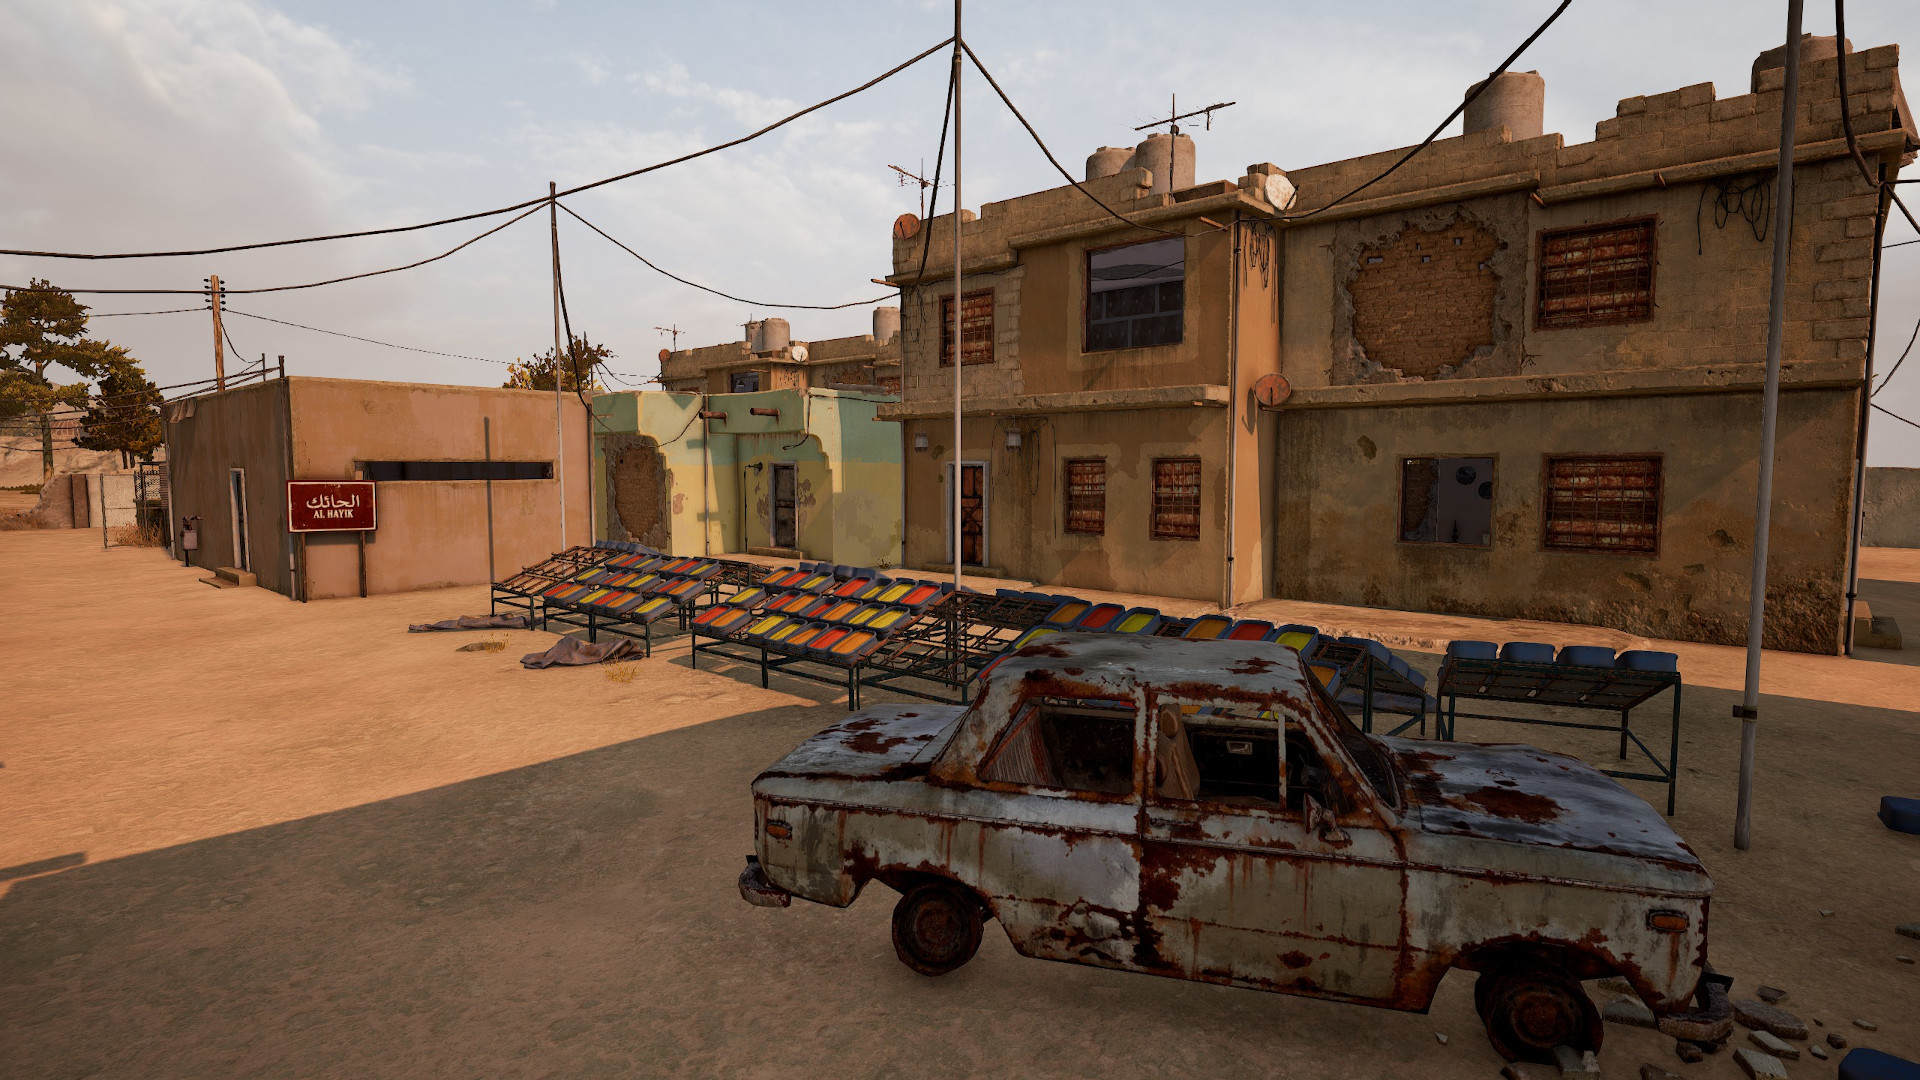 Best PUBG Karakin drops: Al Hayiq with a rusty old car next to wooden stalls and small buildings.